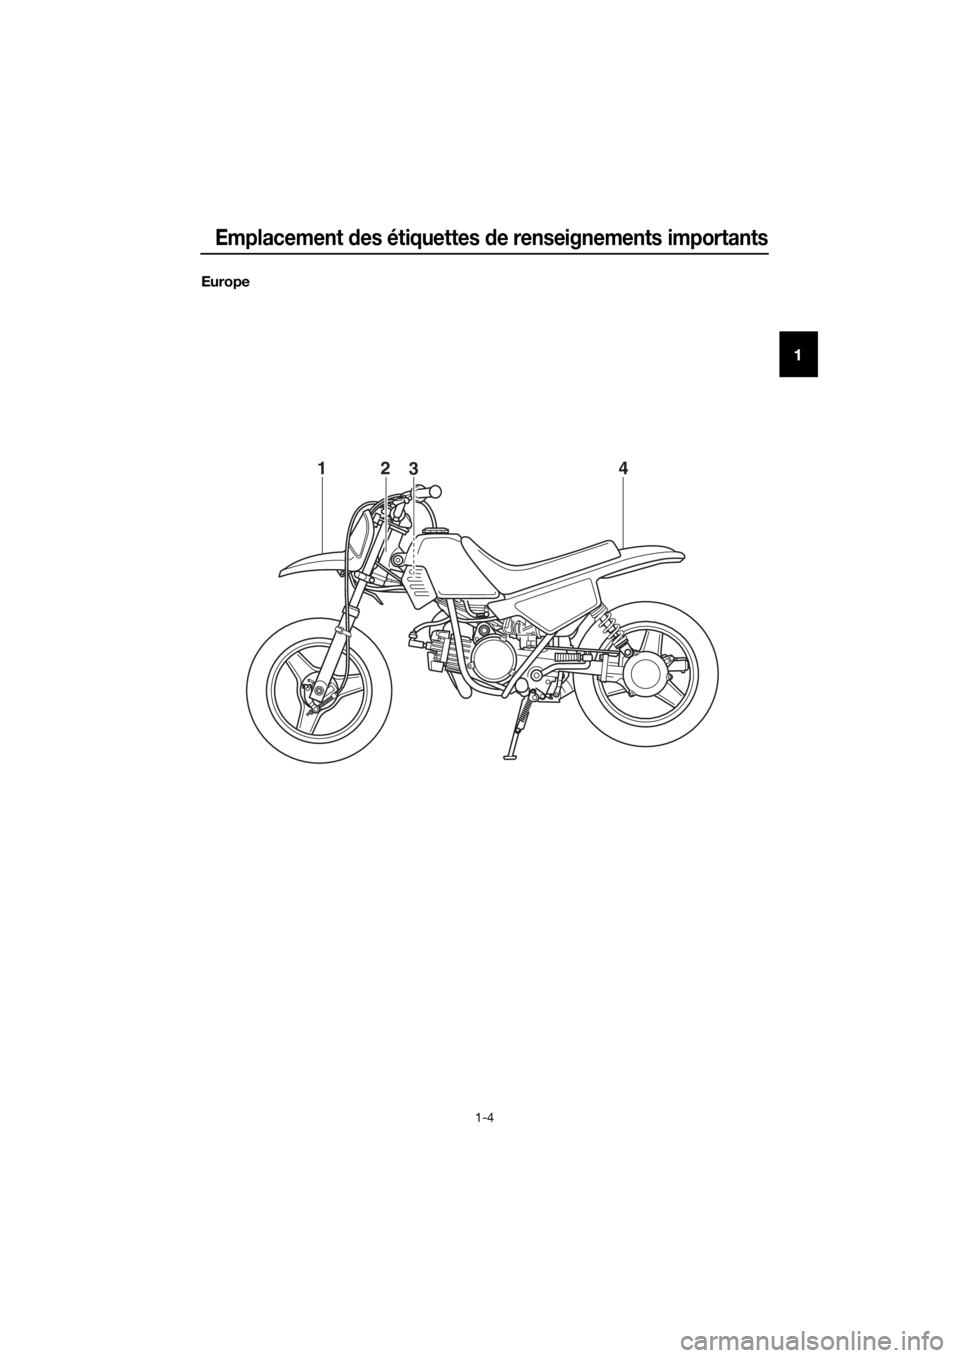 YAMAHA PW50 2019  Notices Demploi (in French) Emplacement des étiquettes  de renseignements importants
1-4
1
Europe
4321
U2SA85F0.book  Page 4  Thursday, May 10, 2018  3:21 PM 